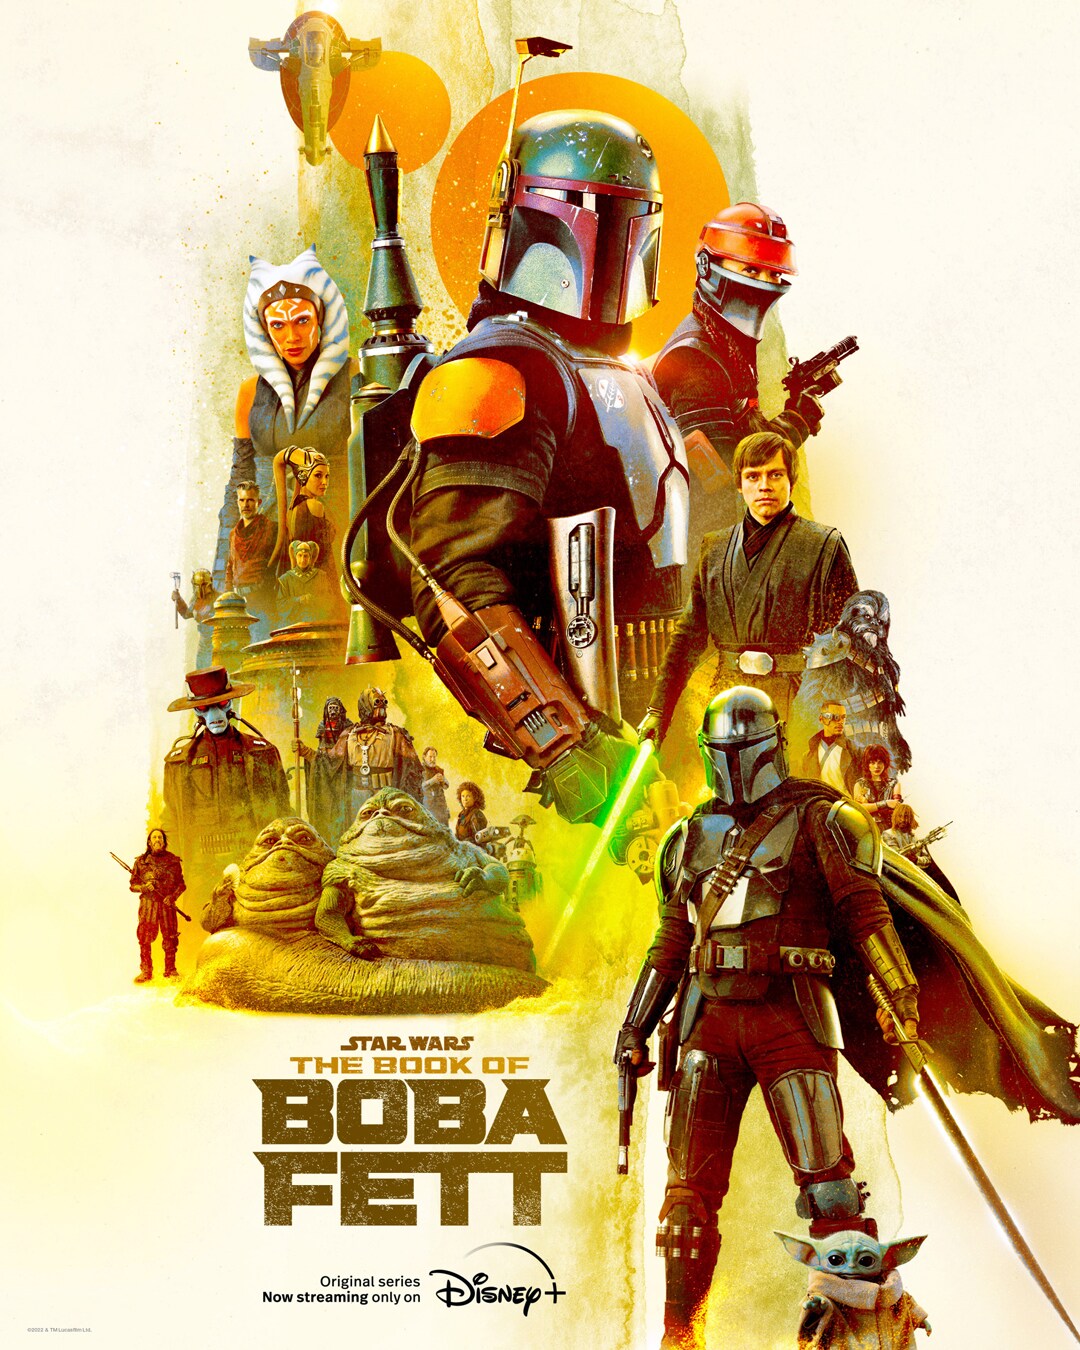 Collage of The Book of Boba Fett characters